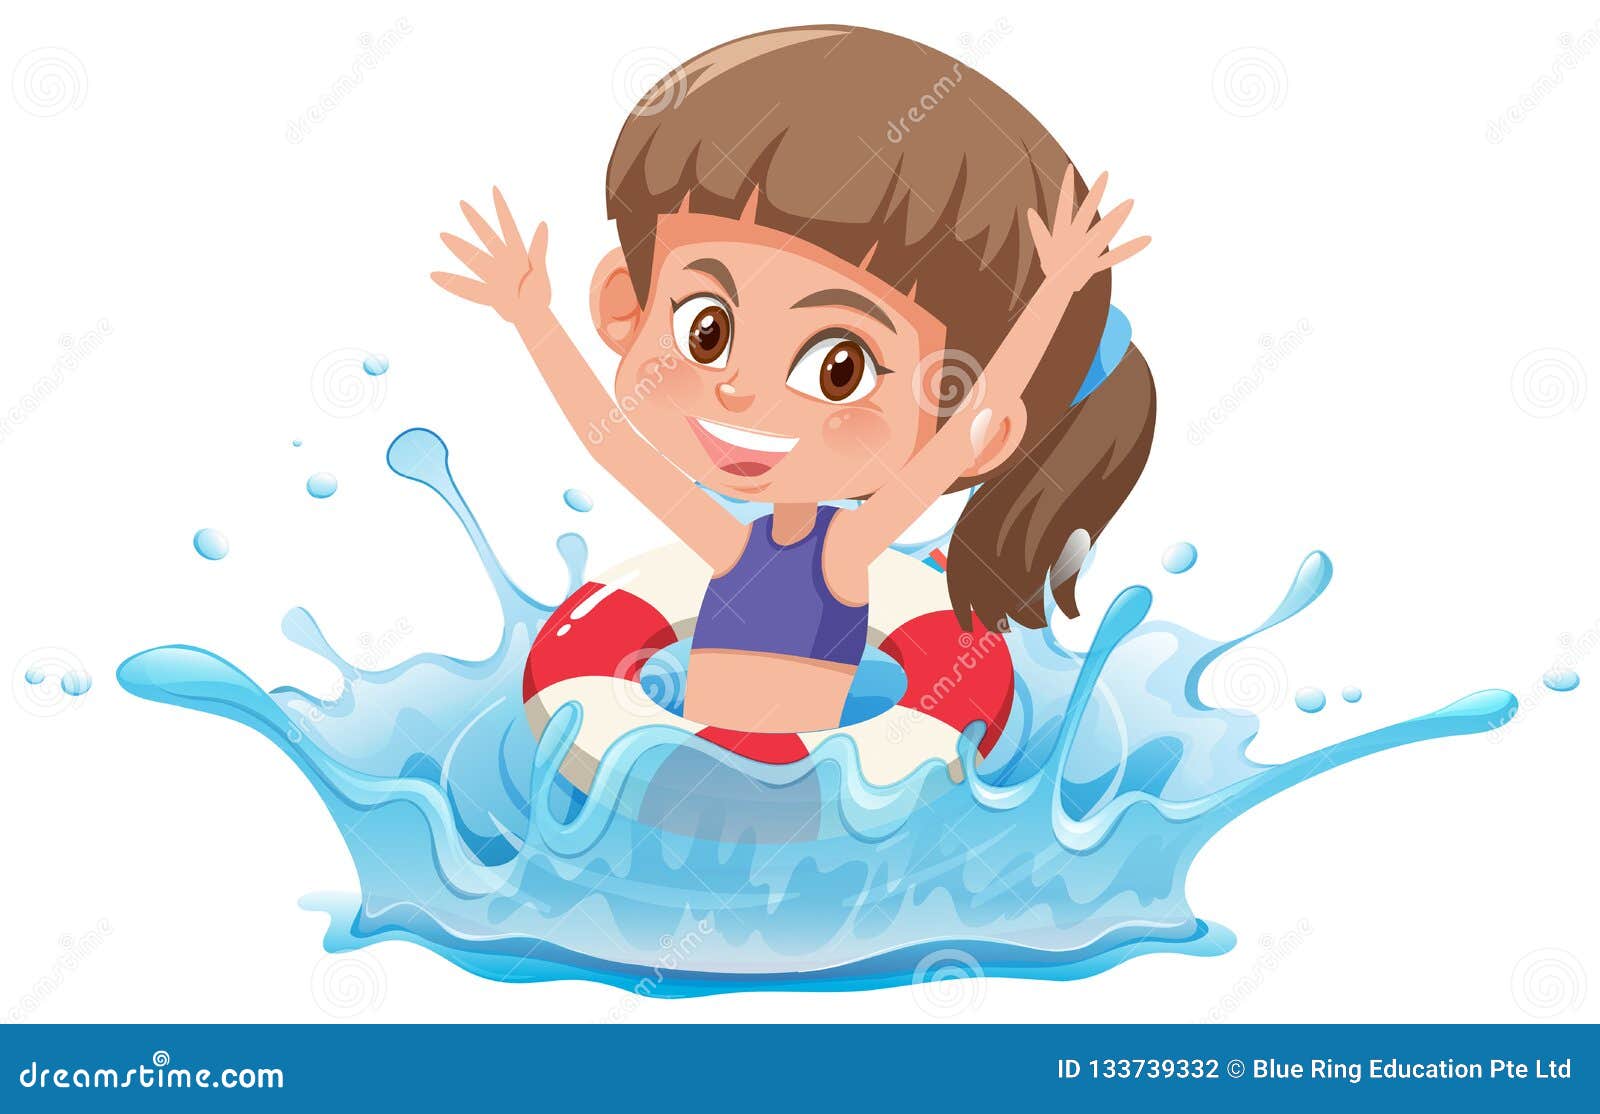 Girl swimming in the pool stock vector. Illustration of happy - 133739332